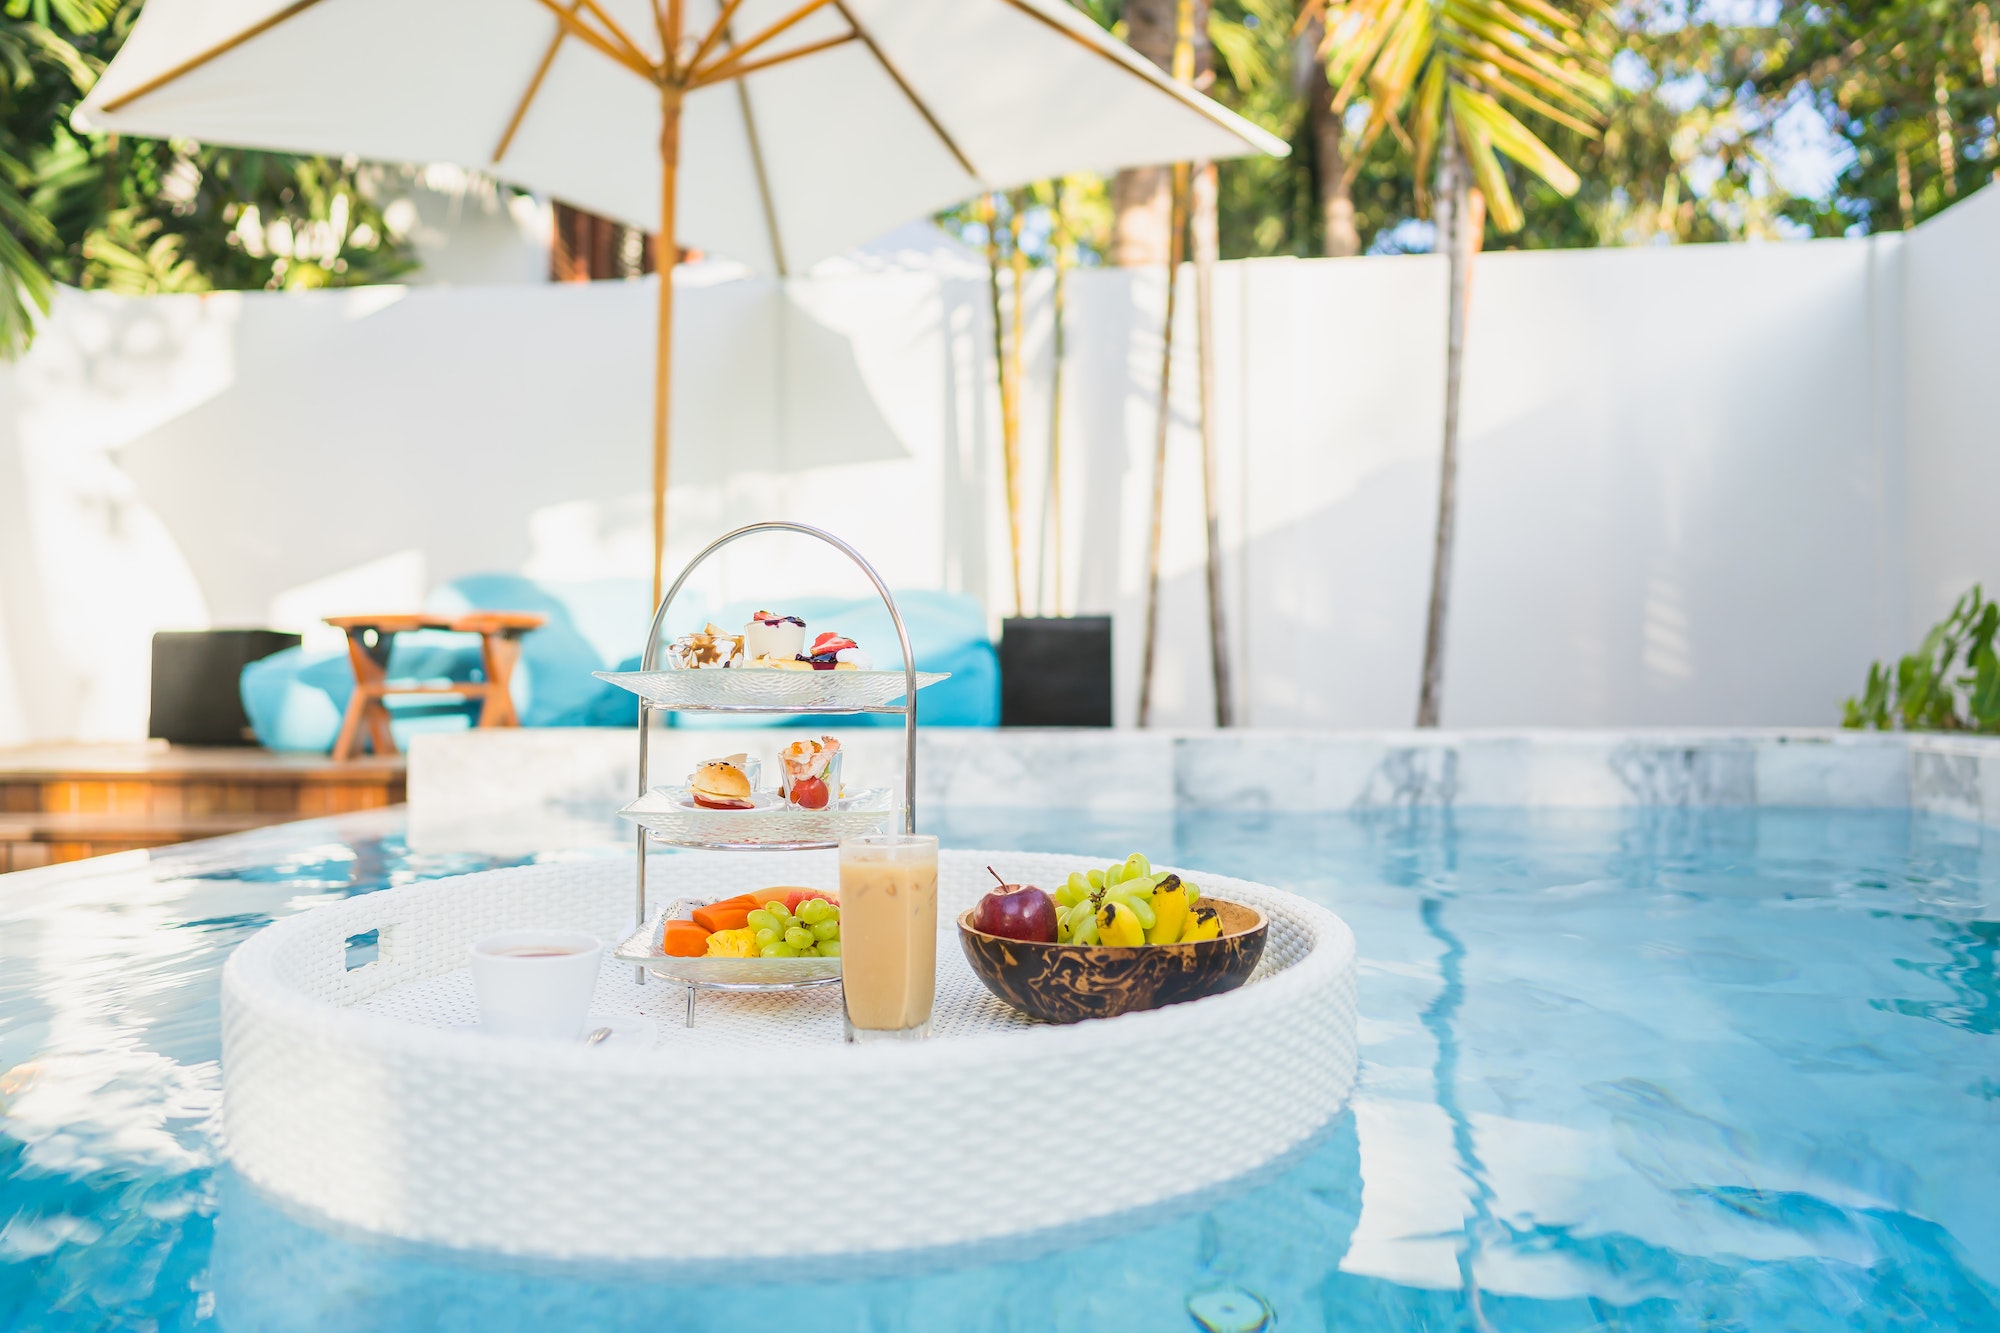 Breakfast and afternoon tea set floating around swimming pool